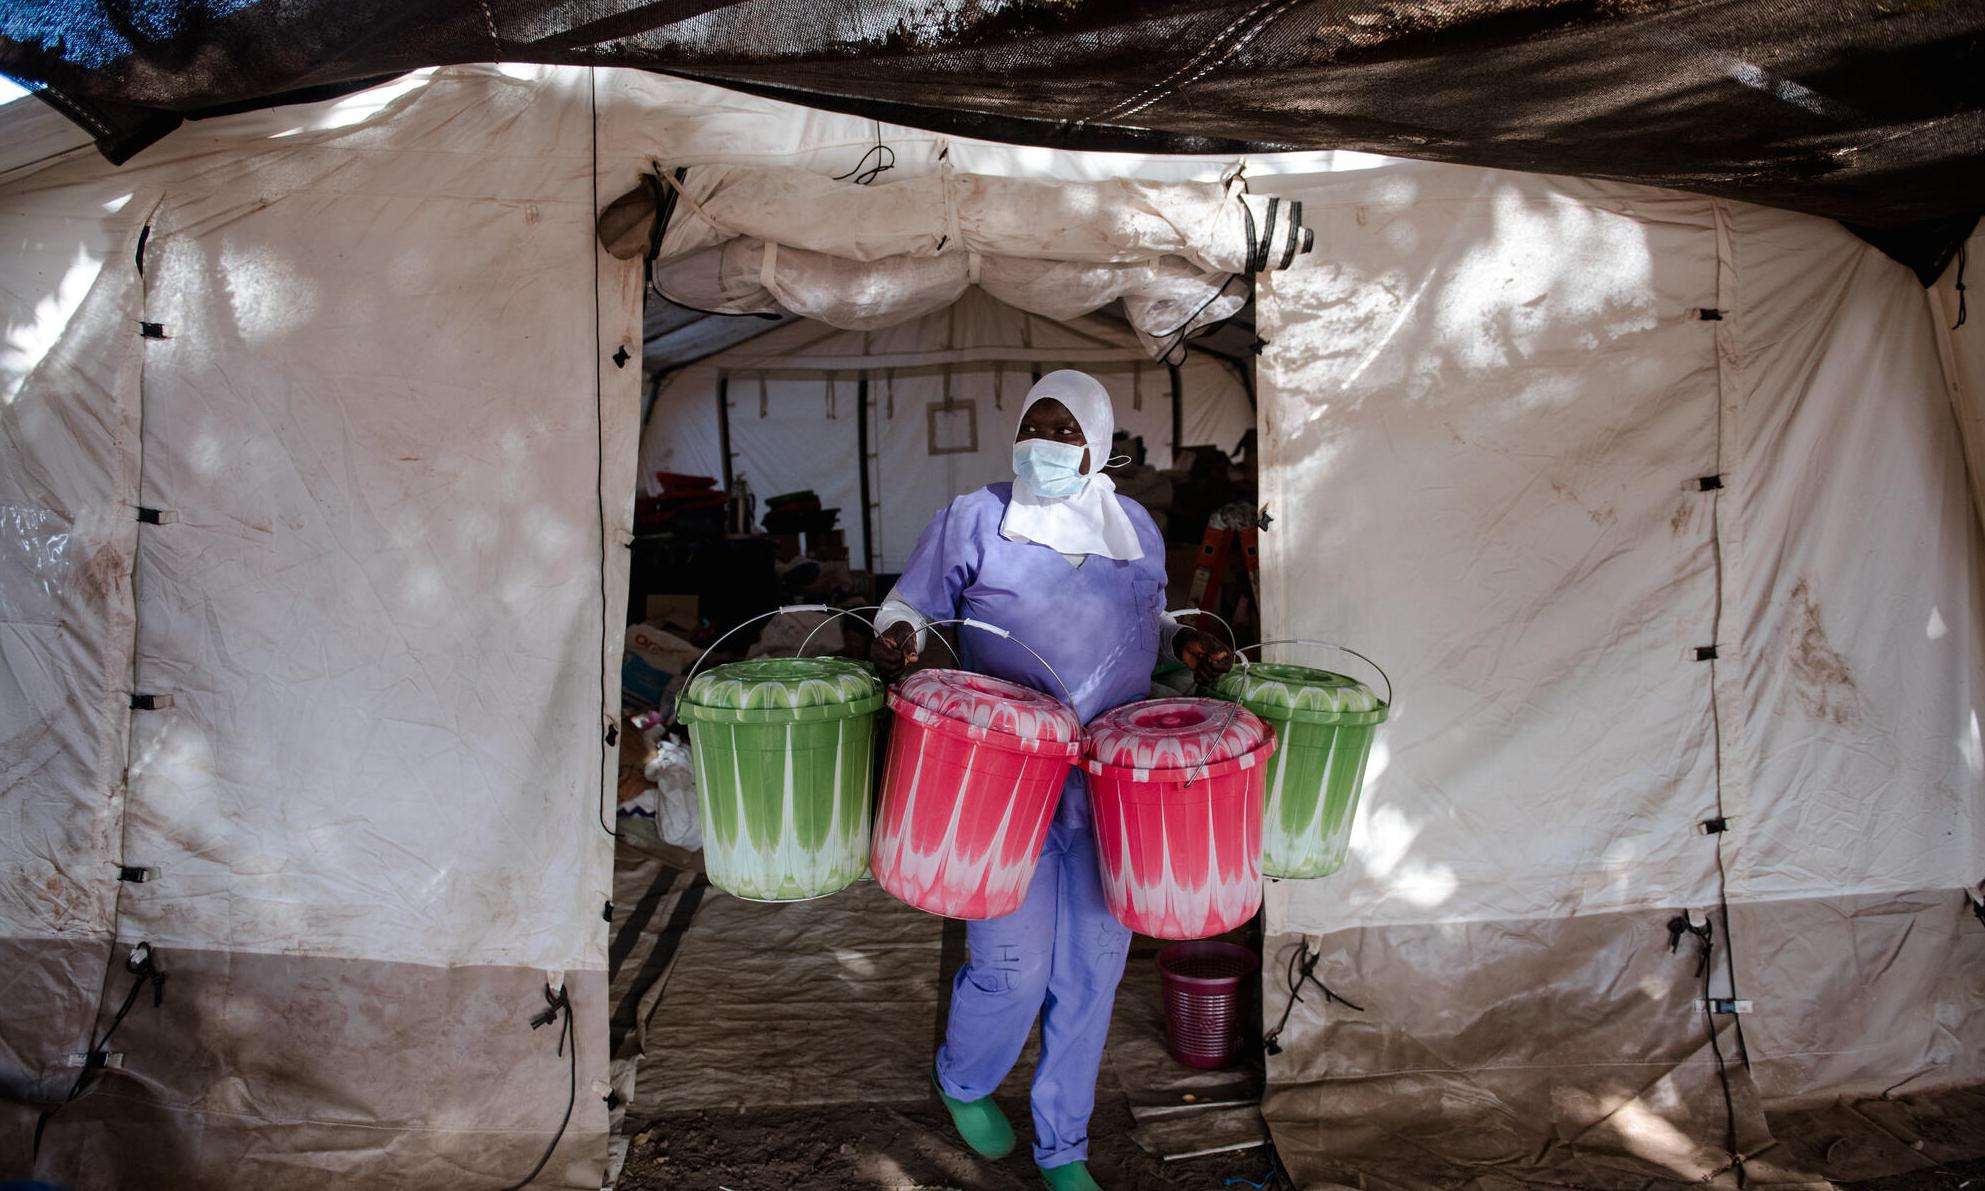 Cisse, a health promoter, carries buckets with kits given to every patient who comes to receive treatment for diphtheria from the logistics tent set up on the ground of the Centre de Traitement Epidemiologique in Guinea.